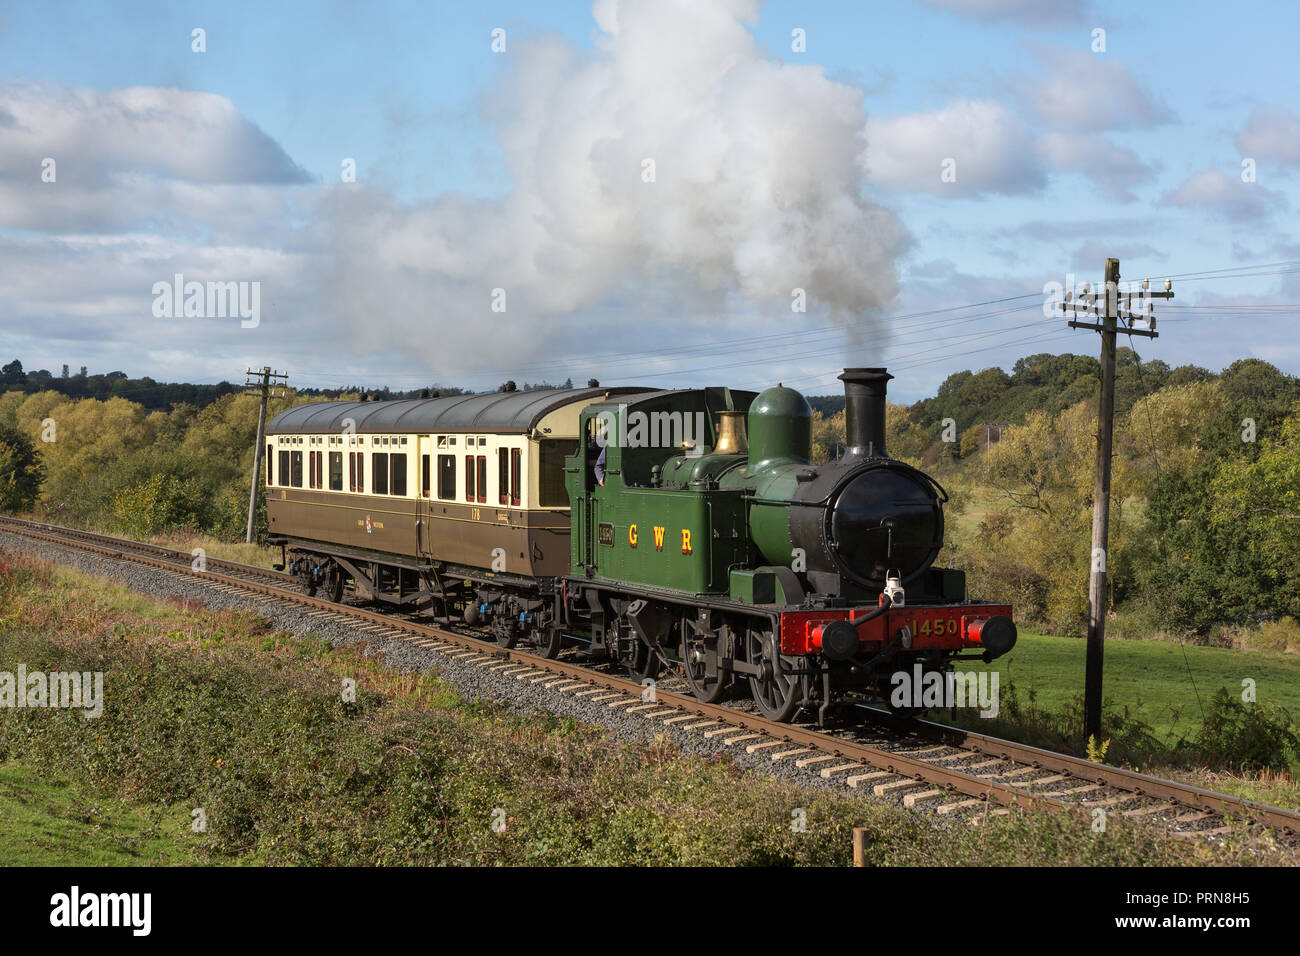 Worcestershire, United Kingdom. 3rd October 2018. In a scene reminiscent of the early 20th century branch line, Great Western Railway tank engine 1450 and an autocoach are seen at various locations on the popular preserved line. Credit: Andrew Plummer/Alamy Live News Stock Photo